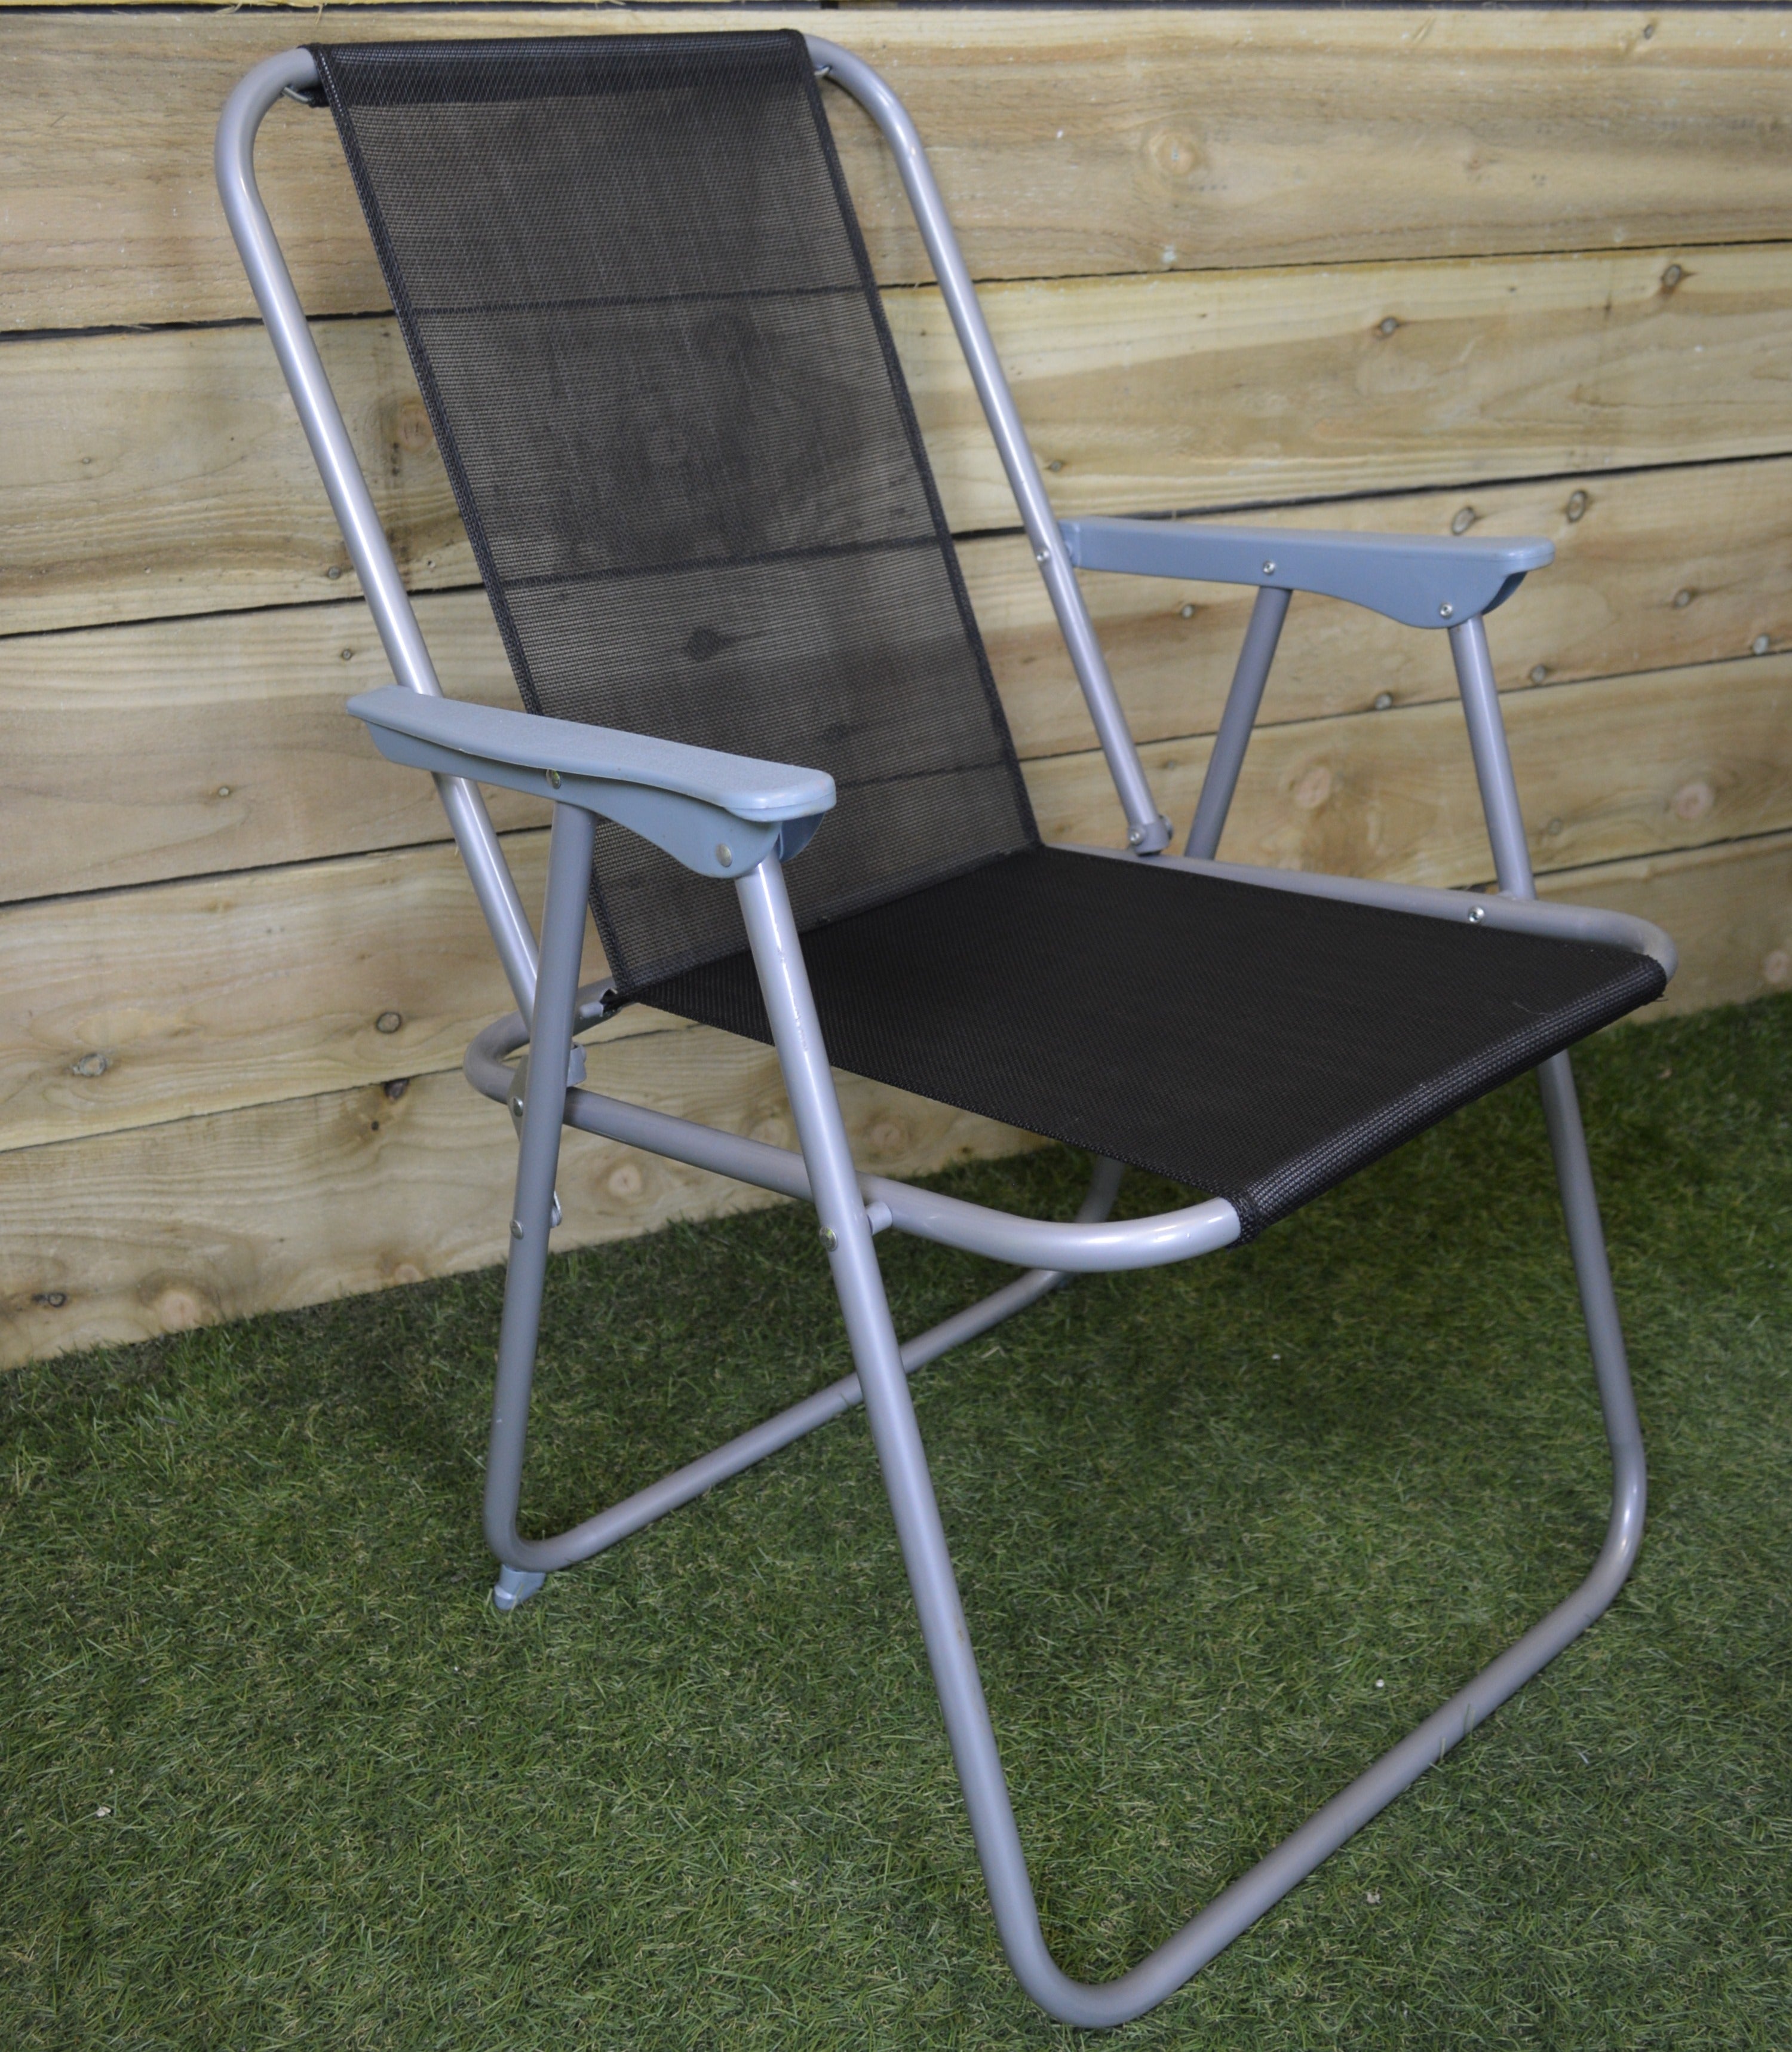 6 x Foldable Garden Chairs Fixed position garden chairs with grey frame and black fabric